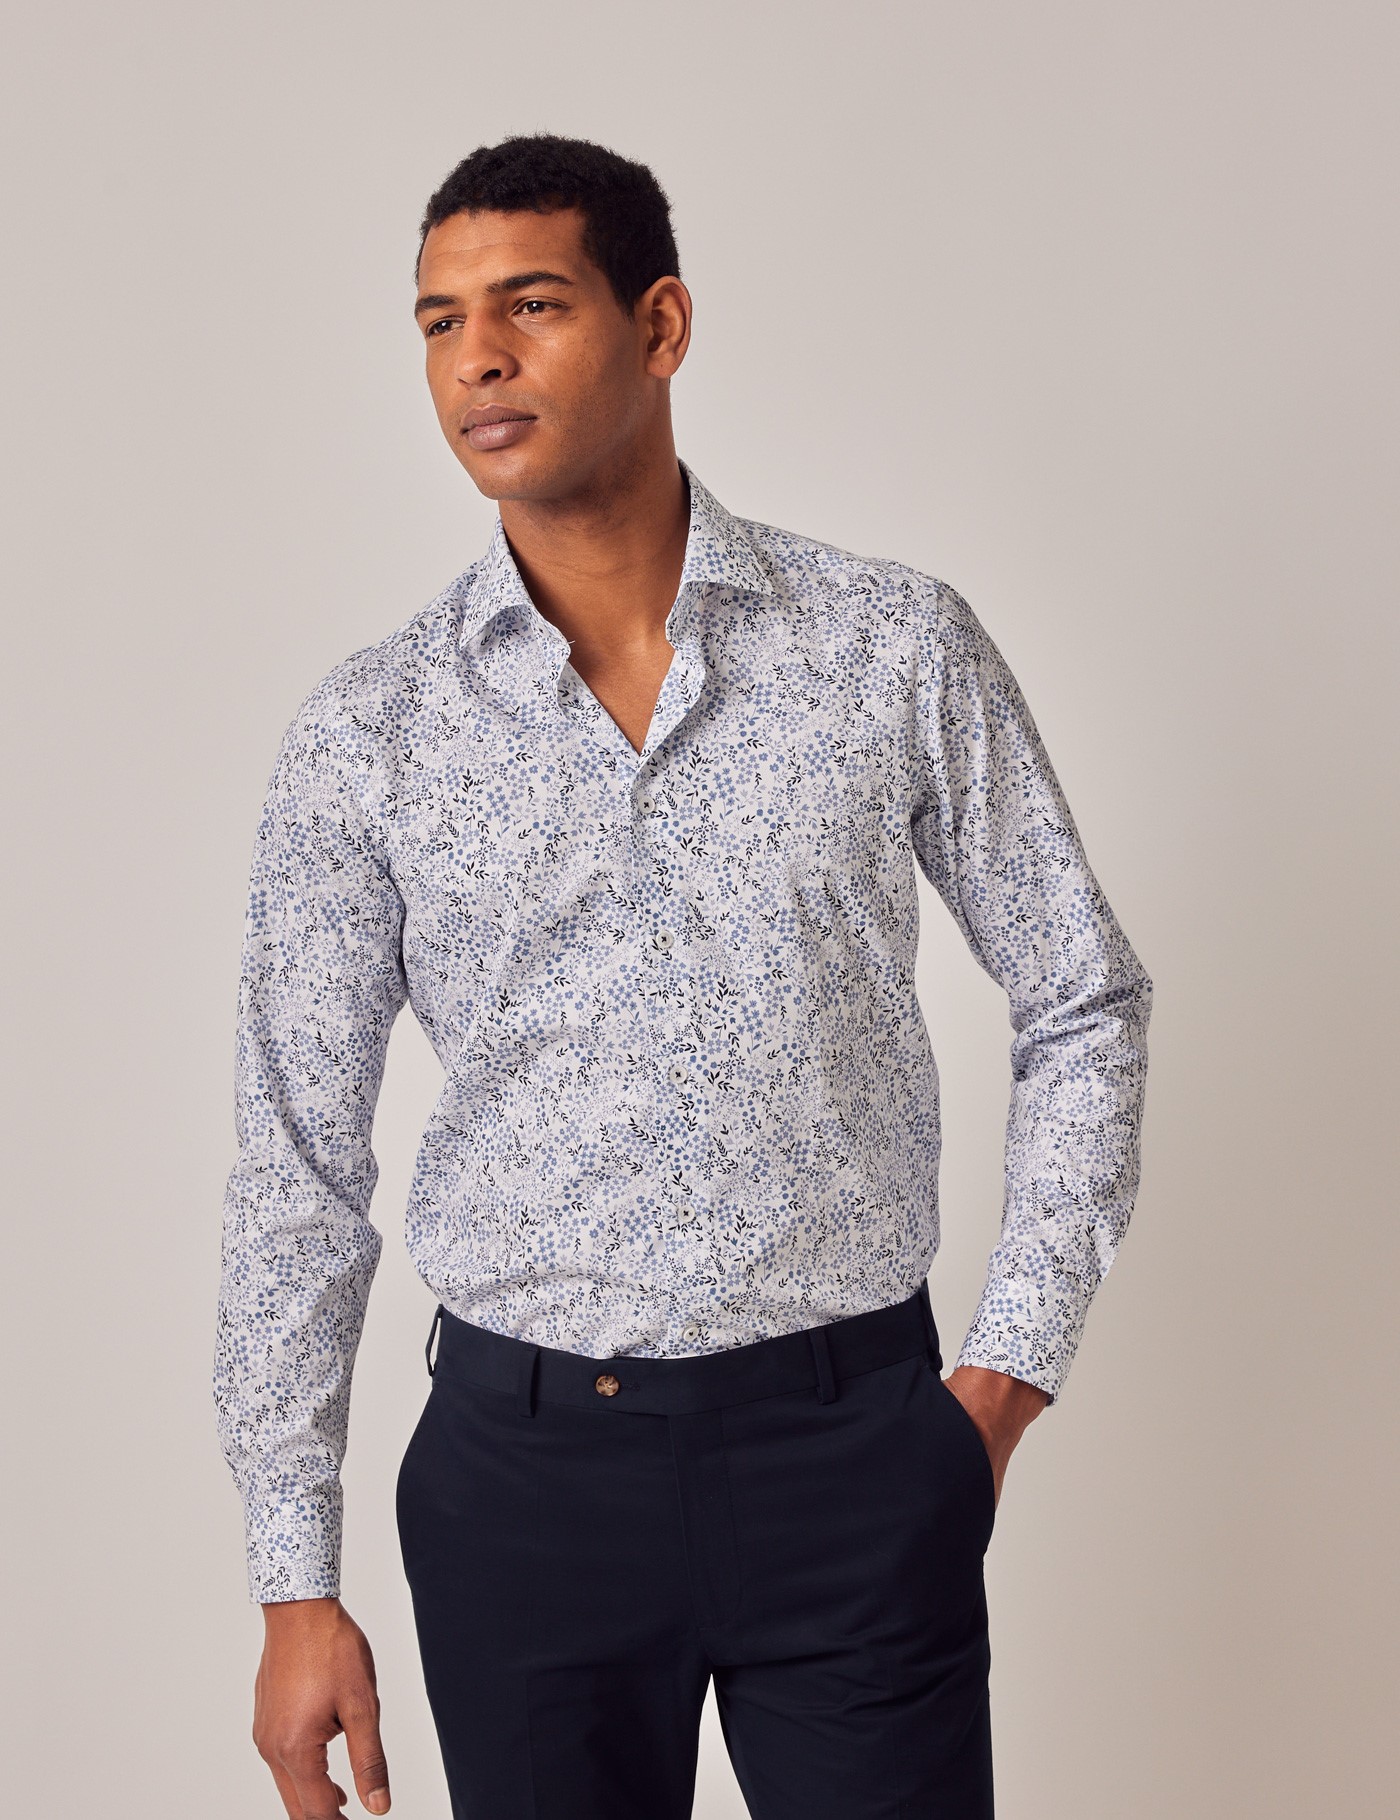 Men's Casual White & Blue Ditsy Floral Cotton Stretch Shirt